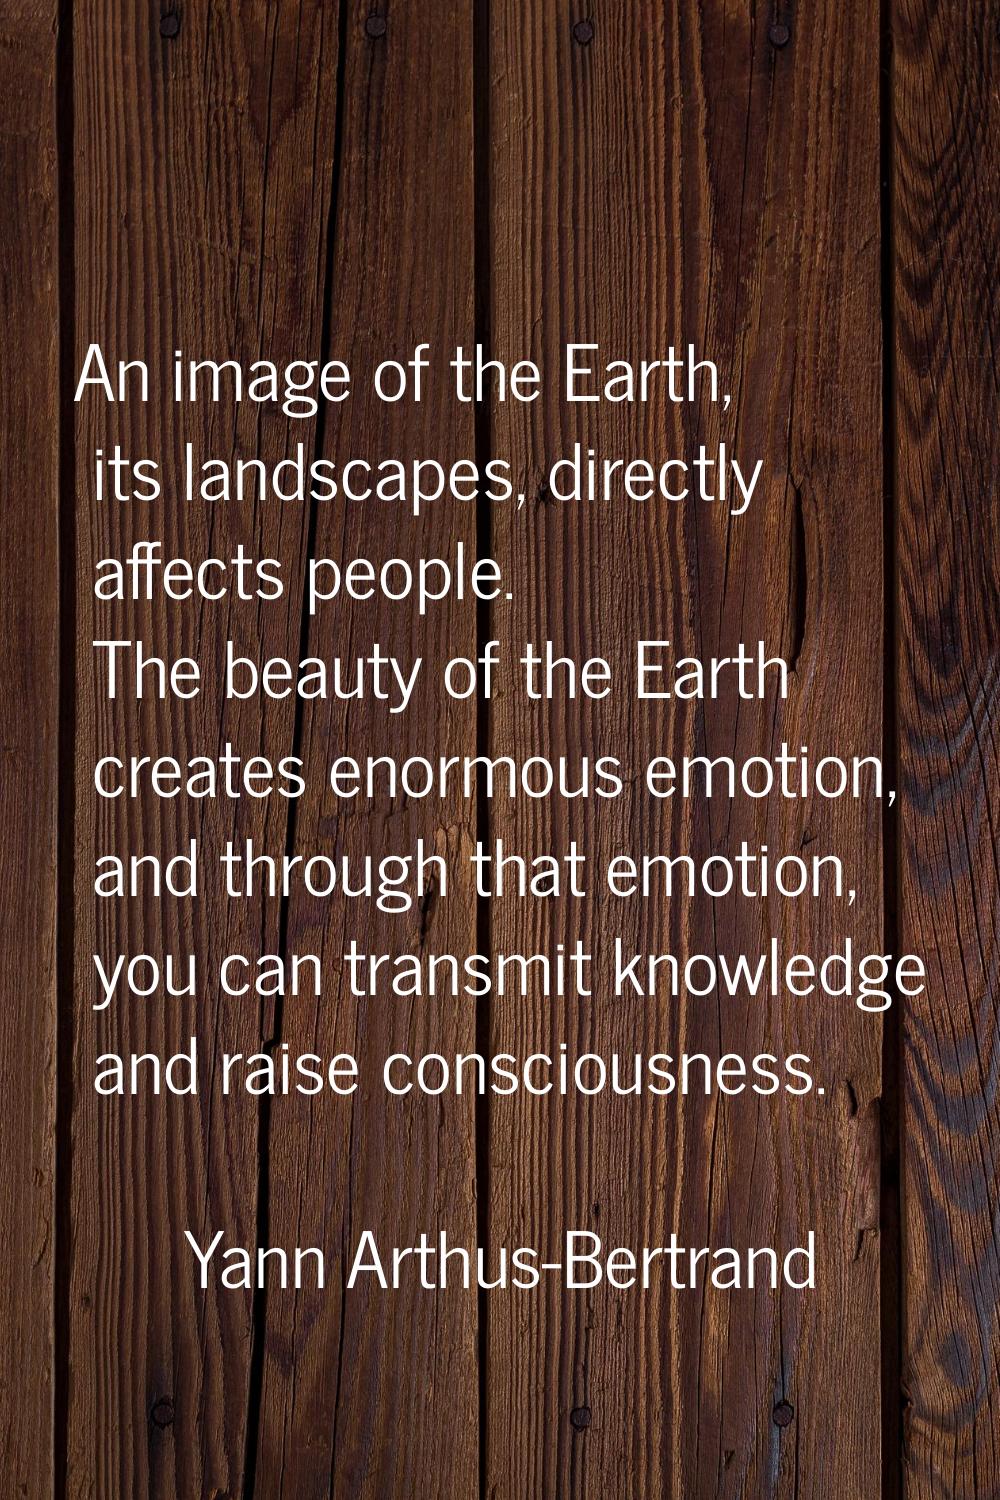 An image of the Earth, its landscapes, directly affects people. The beauty of the Earth creates eno